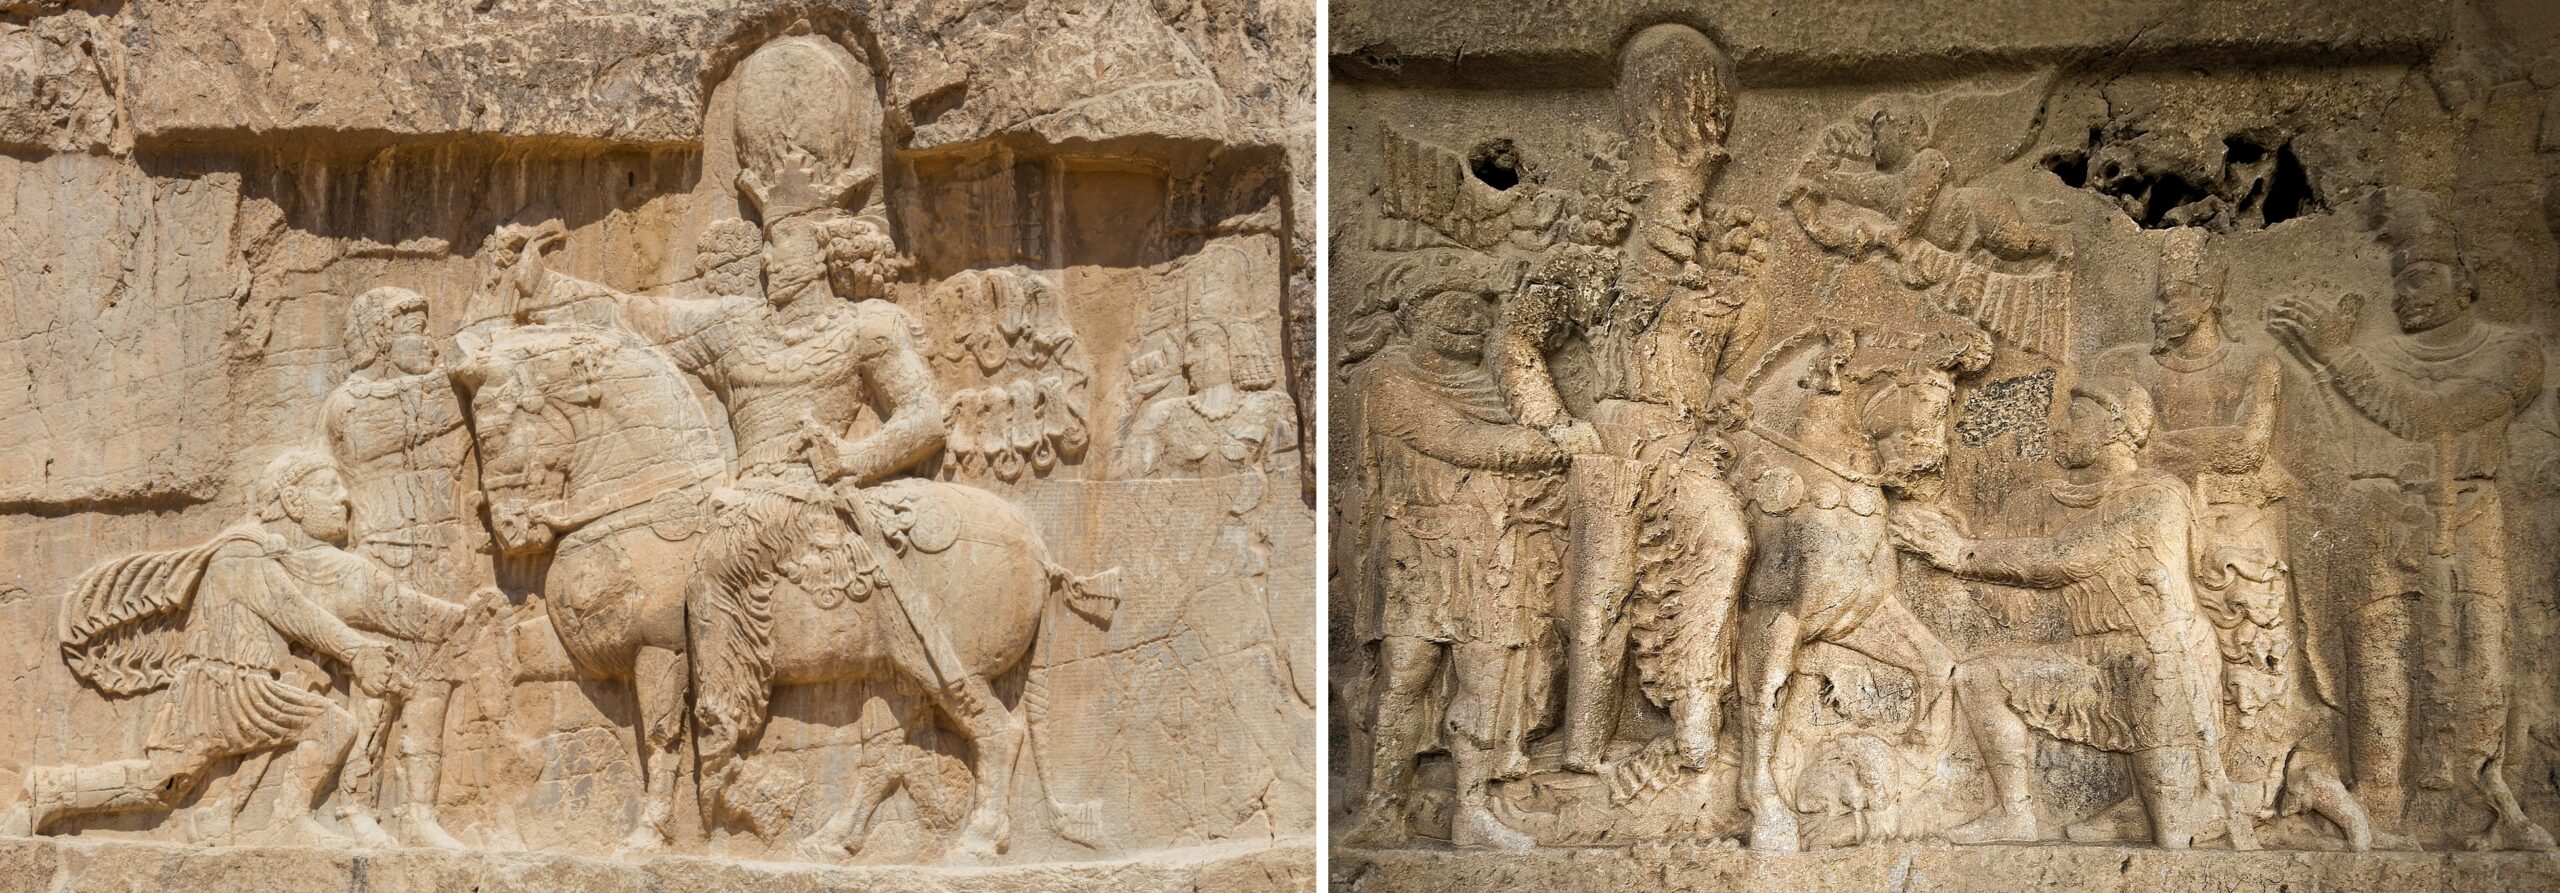 In rock-cut reliefs, the Sasanian king Shapur I (240-70 C.E.) appears on horseback while grabbing the wrists of the Roman emperor Valerian (253-60 C.E.) to show his capture. Before him kneels the Roman emperor Philip I from Arabia (244-49 C.E.), and beneath the horse lies the body of the Roman emperor Gordian III (242-44 C.E.).